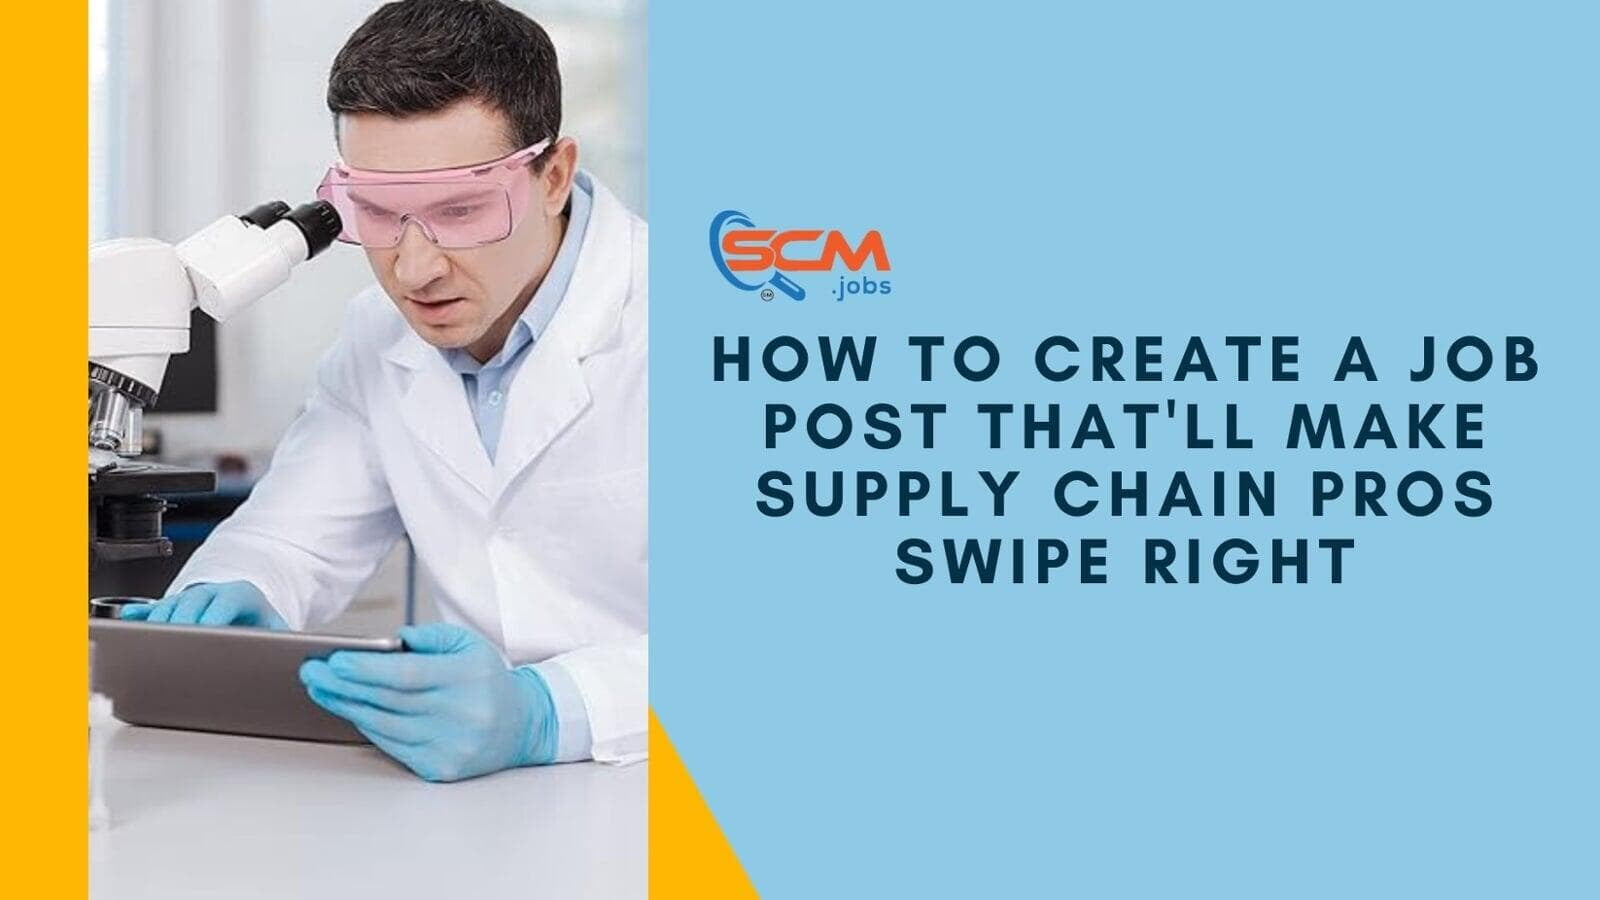 How to Create a Job Post That'll Make Supply Chain Pros Swipe Right